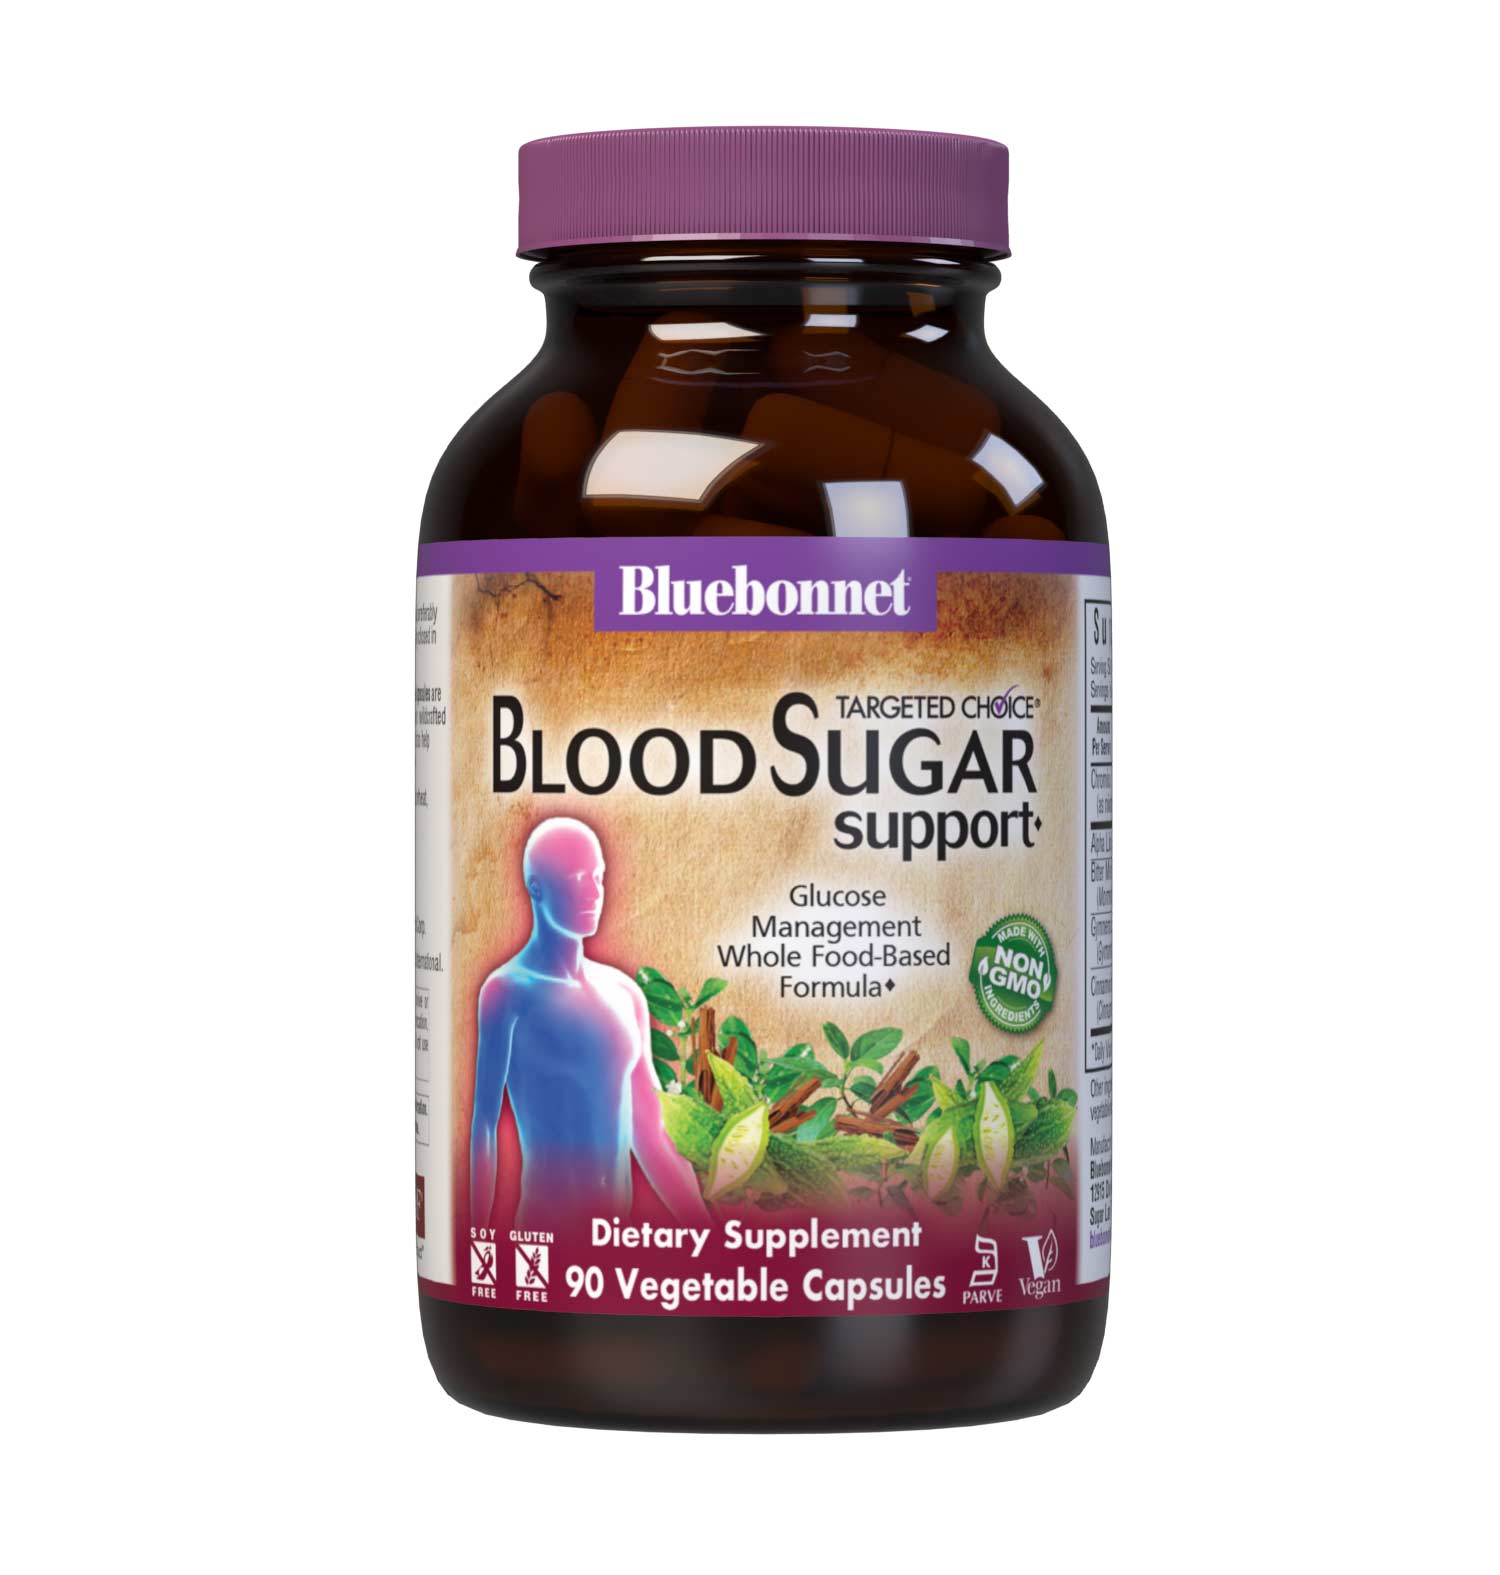 Bluebonnet’s Targeted Choice Blood Sugar Support 90 Vegetable Capsules are specially formulated with a unique blend of sustainably harvested or wildcrafted herbal/botanical extracts, chelated chromium, plus alpha lipoic acid to help maintain healthy blood glucose levels already within the normal range. #size_90 count